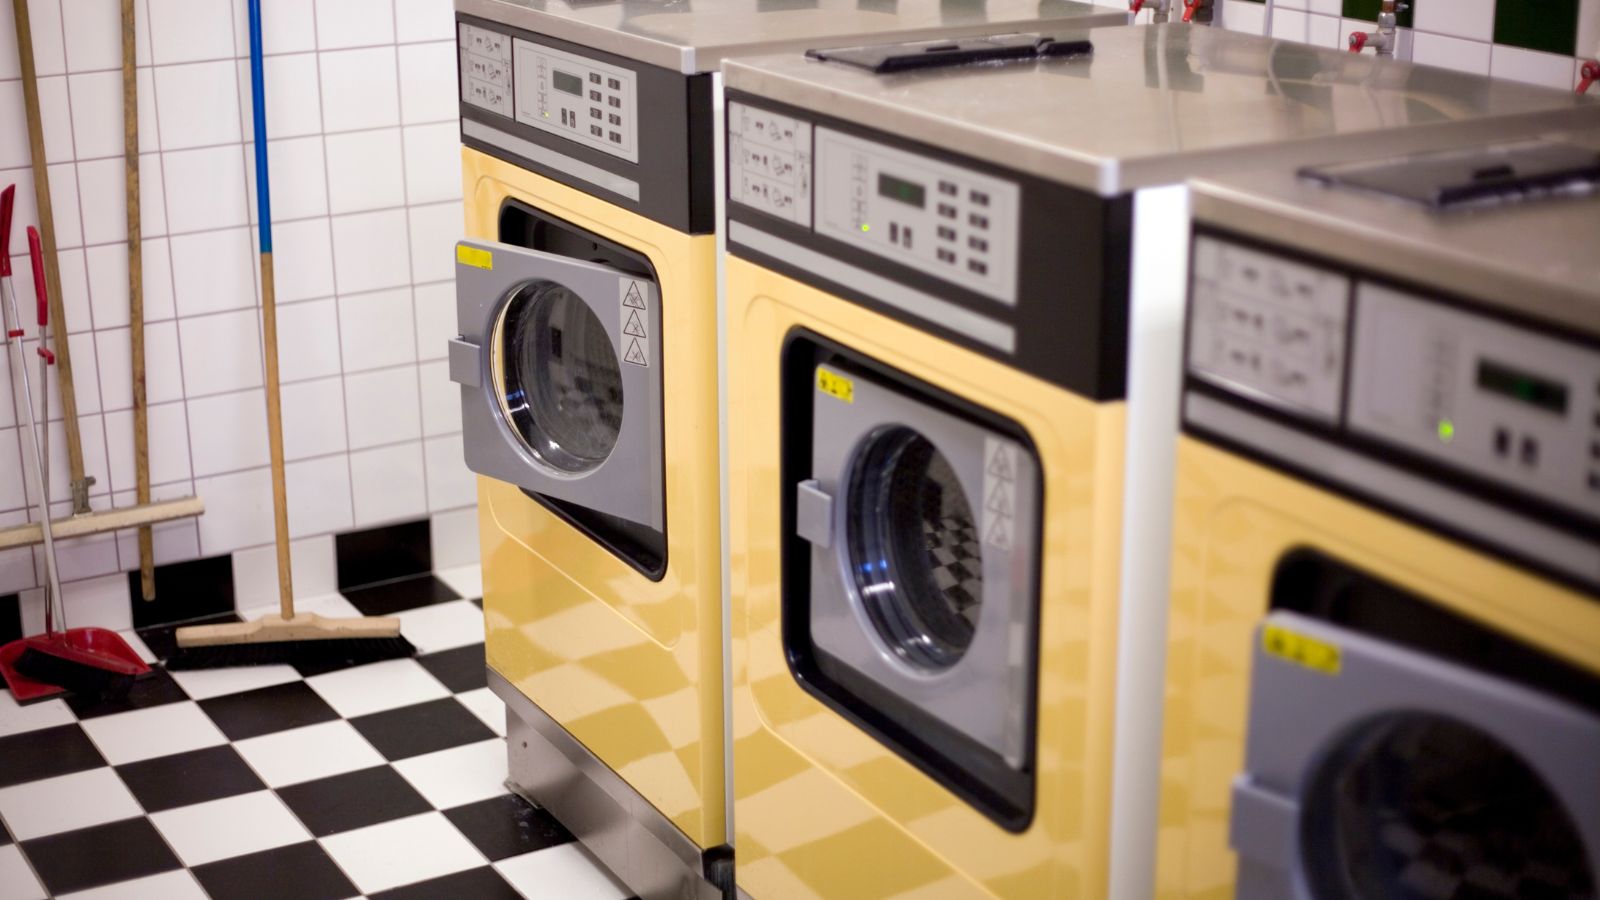 The Right Tile Makes Laundry Room Magic
